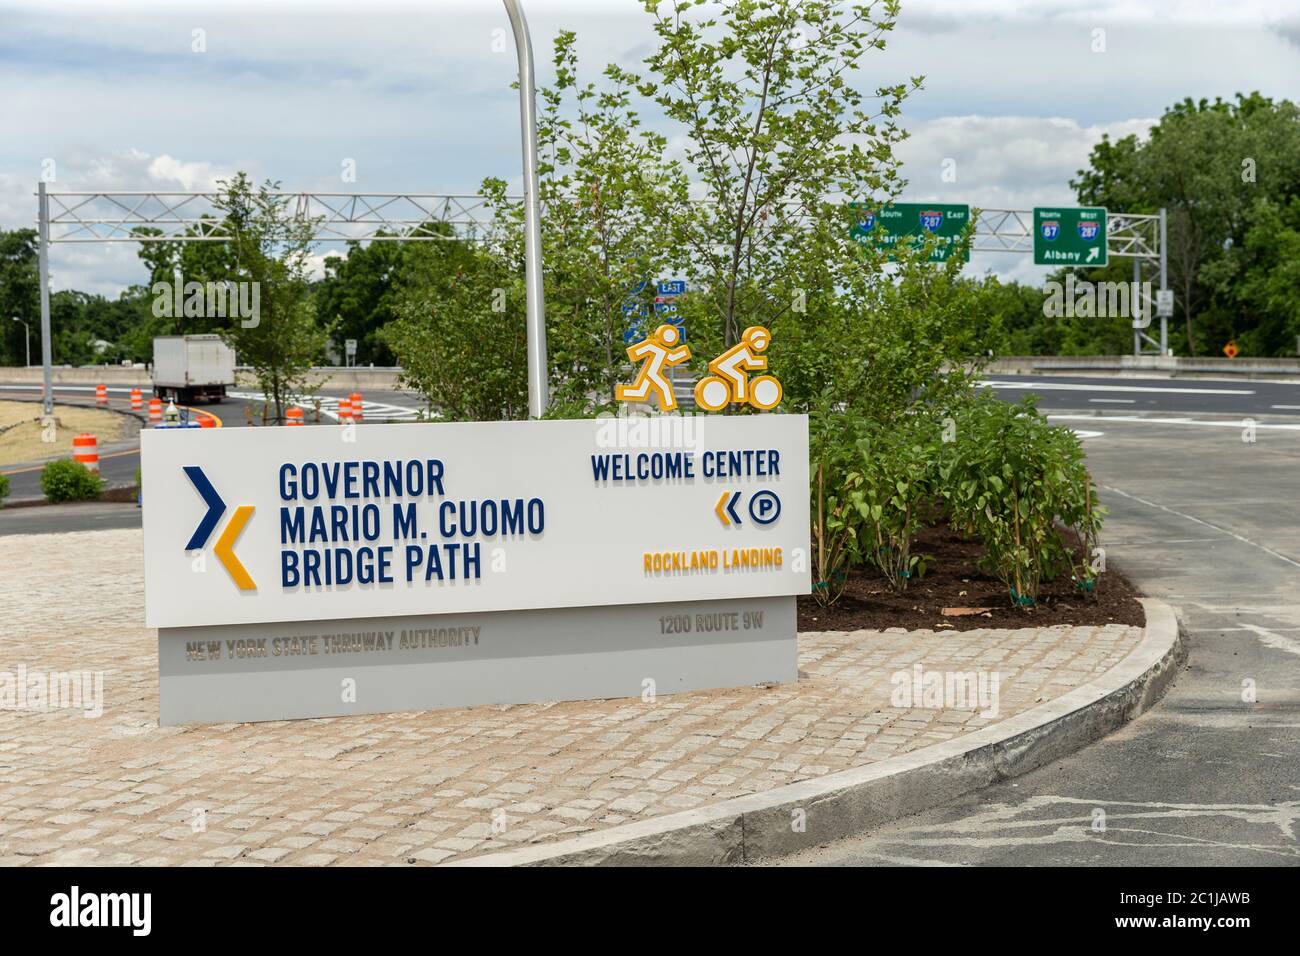 Tarrytown, NY - June 15, 2020: View of the entrance to Rockland landing welcome center of Mario Cuomo Bridge in Tarrytown. Stock Photo